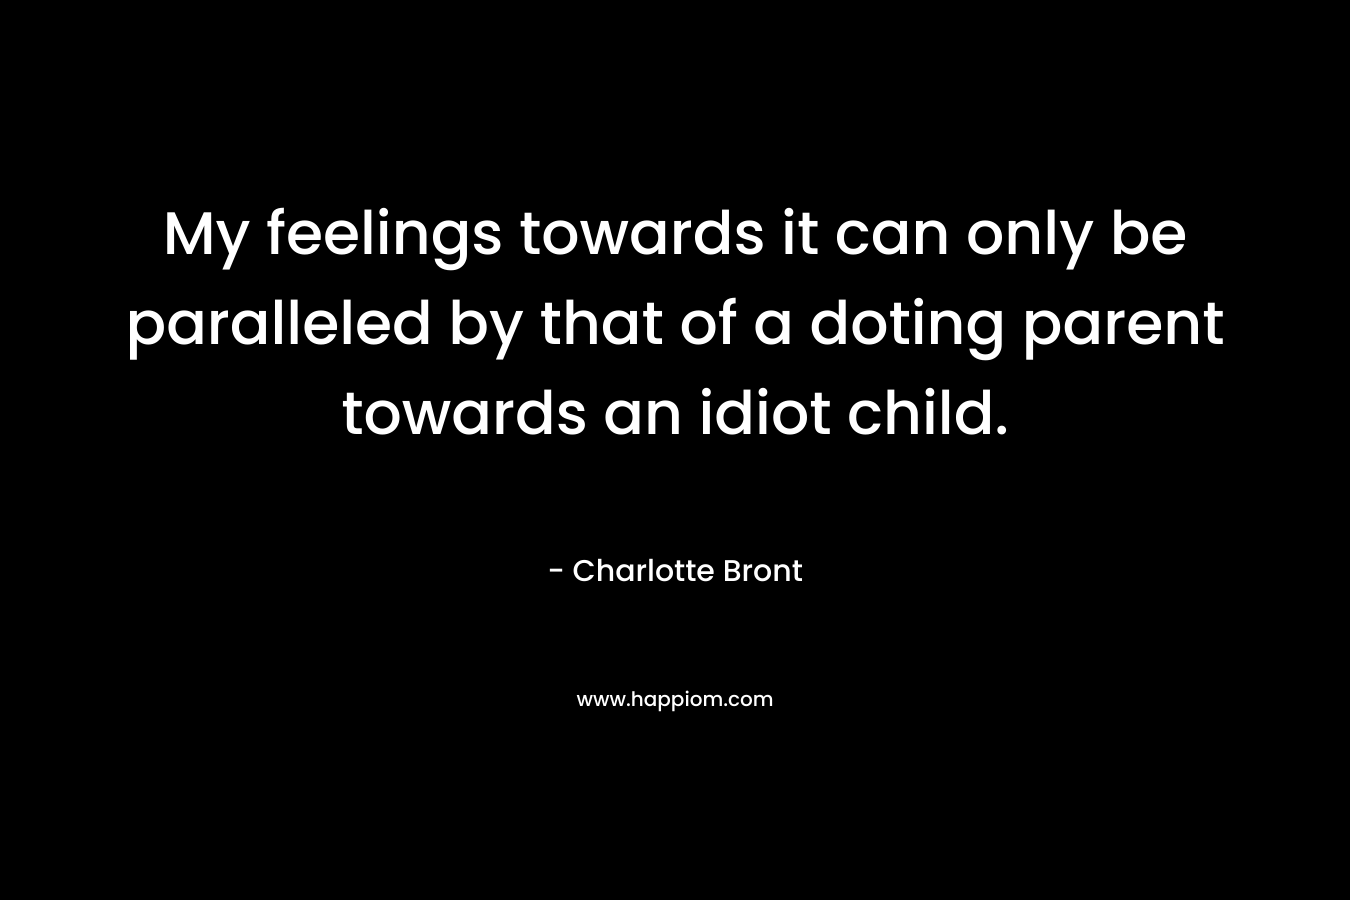 My feelings towards it can only be paralleled by that of a doting parent towards an idiot child.